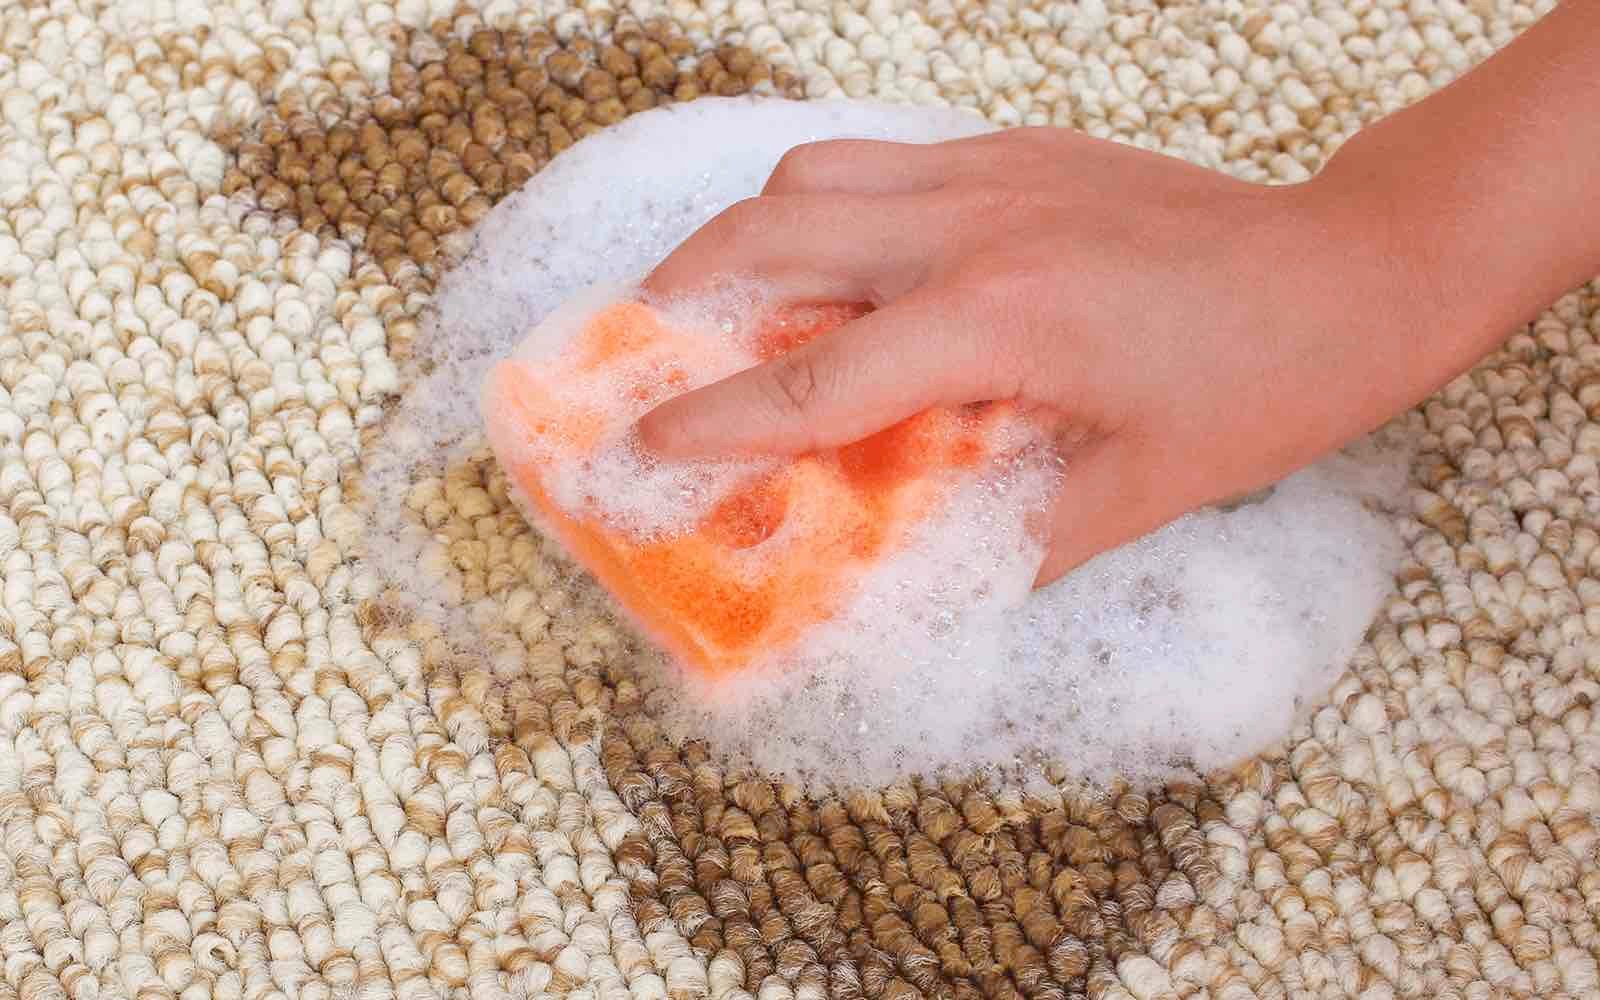 How To Get Blood Stains Out Of Carpet - Carpet Stain Removal